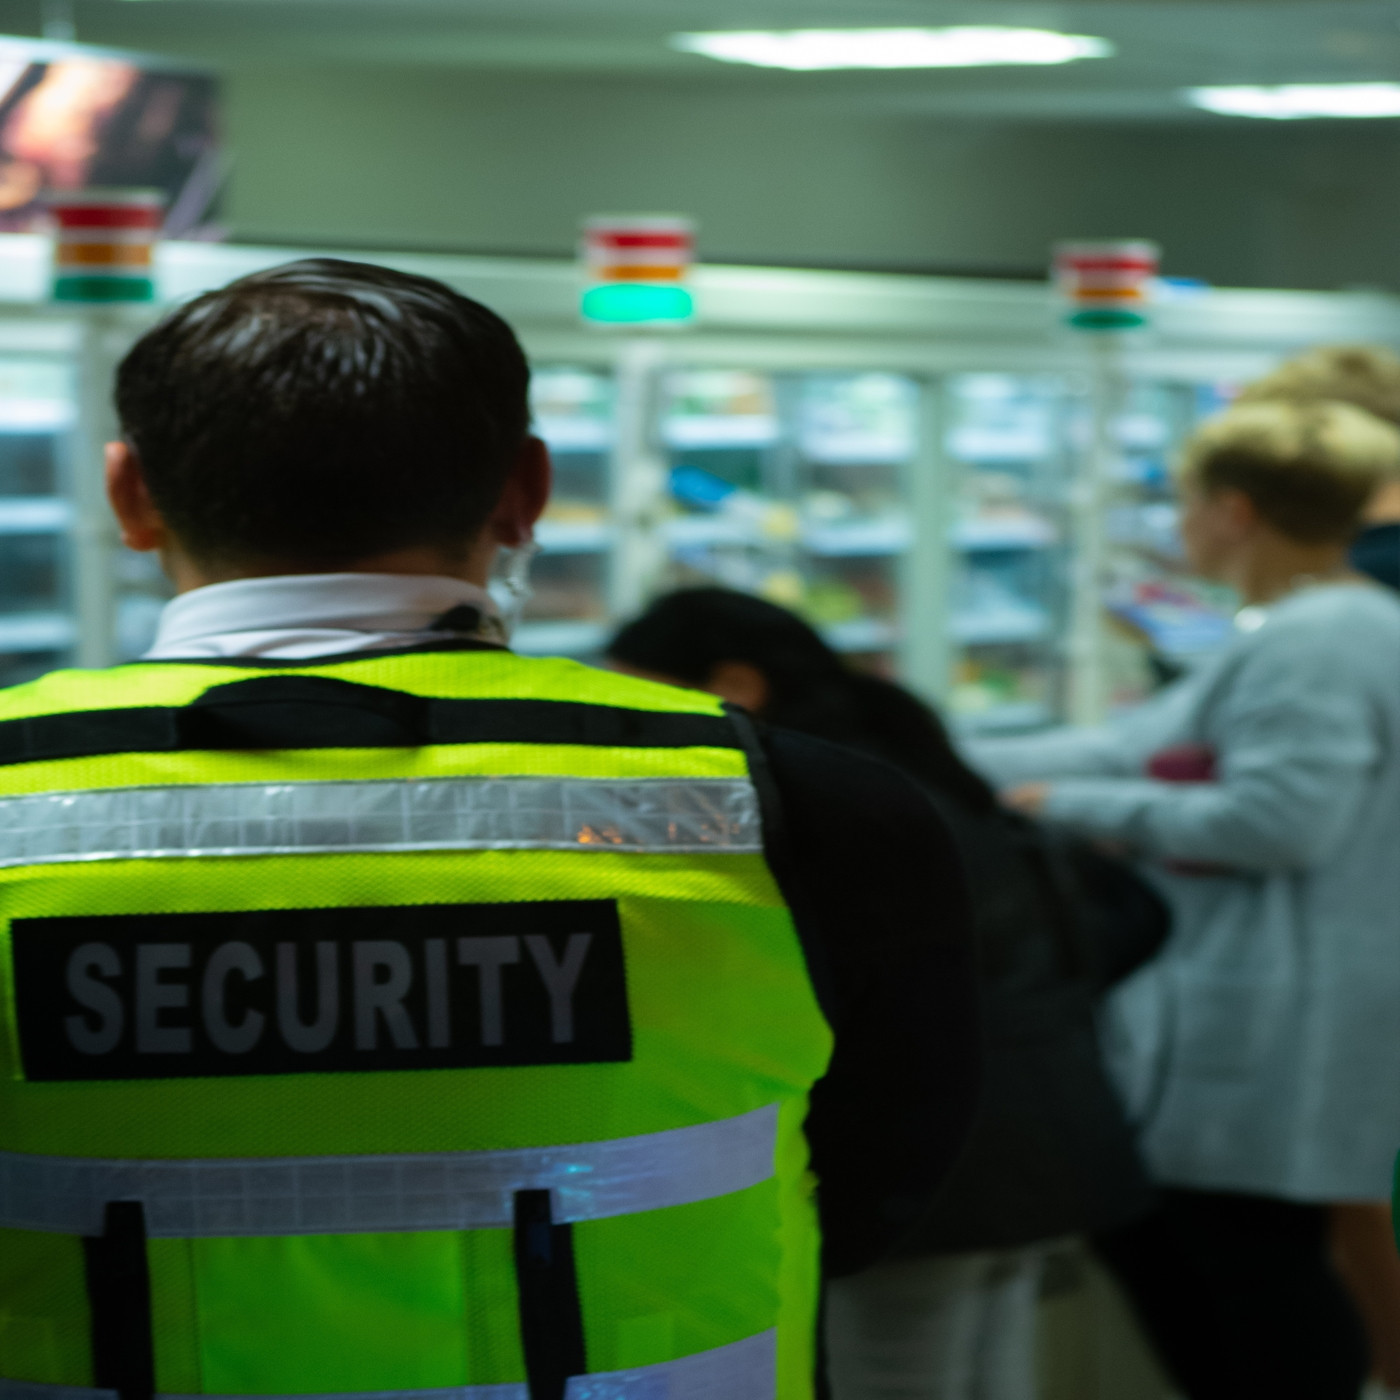 Law Focus - Private Security/Security Guards